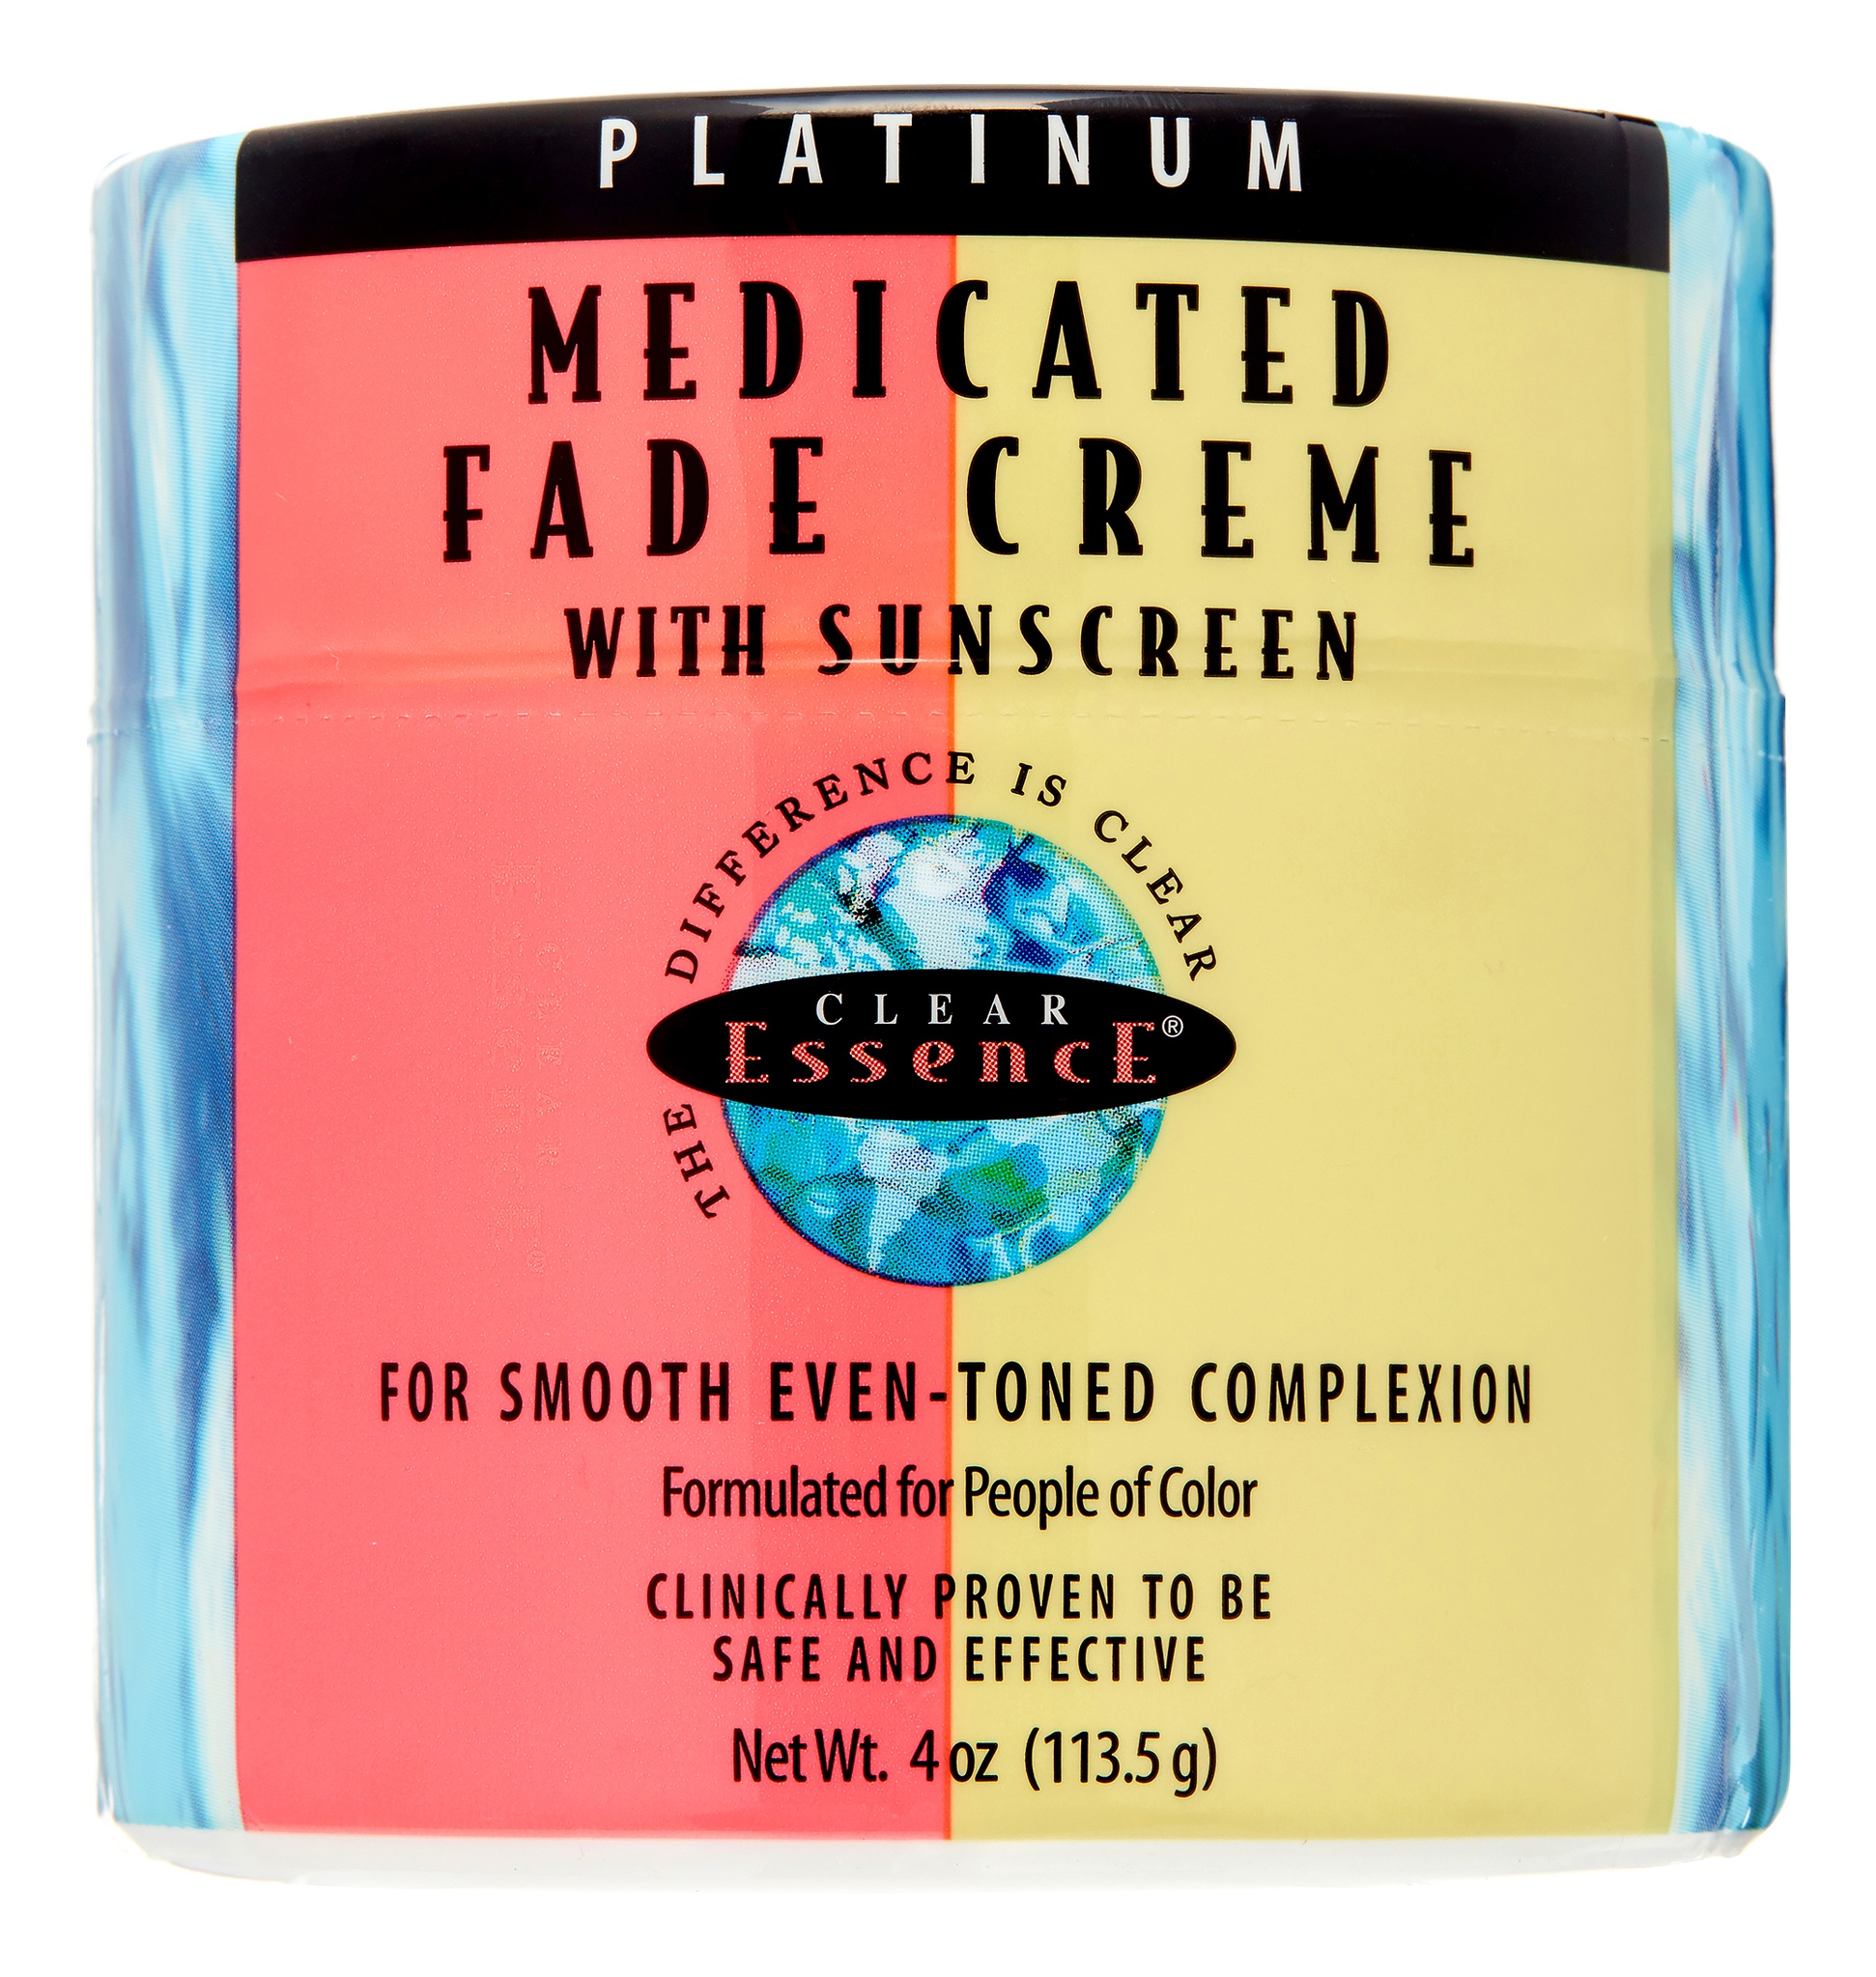 Clear Essence Platinum Medicated Fade Creme with Sunscreen